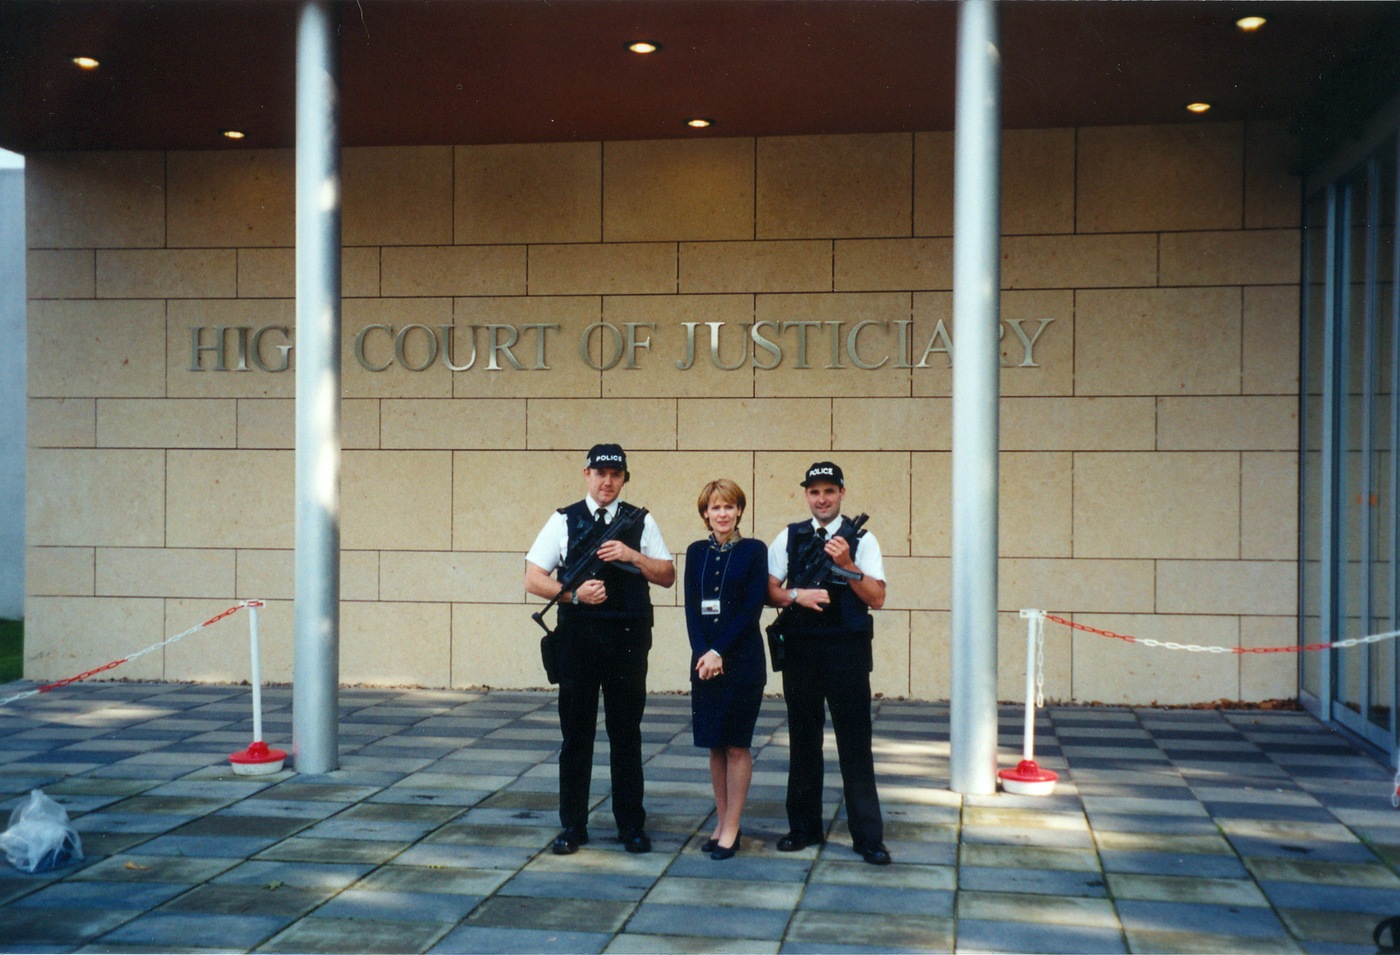 Kathryn Turman stands alongside guards at the High Court of Justiciary at Camp Zeist in Utrecht, the Netherlands, in 2000.